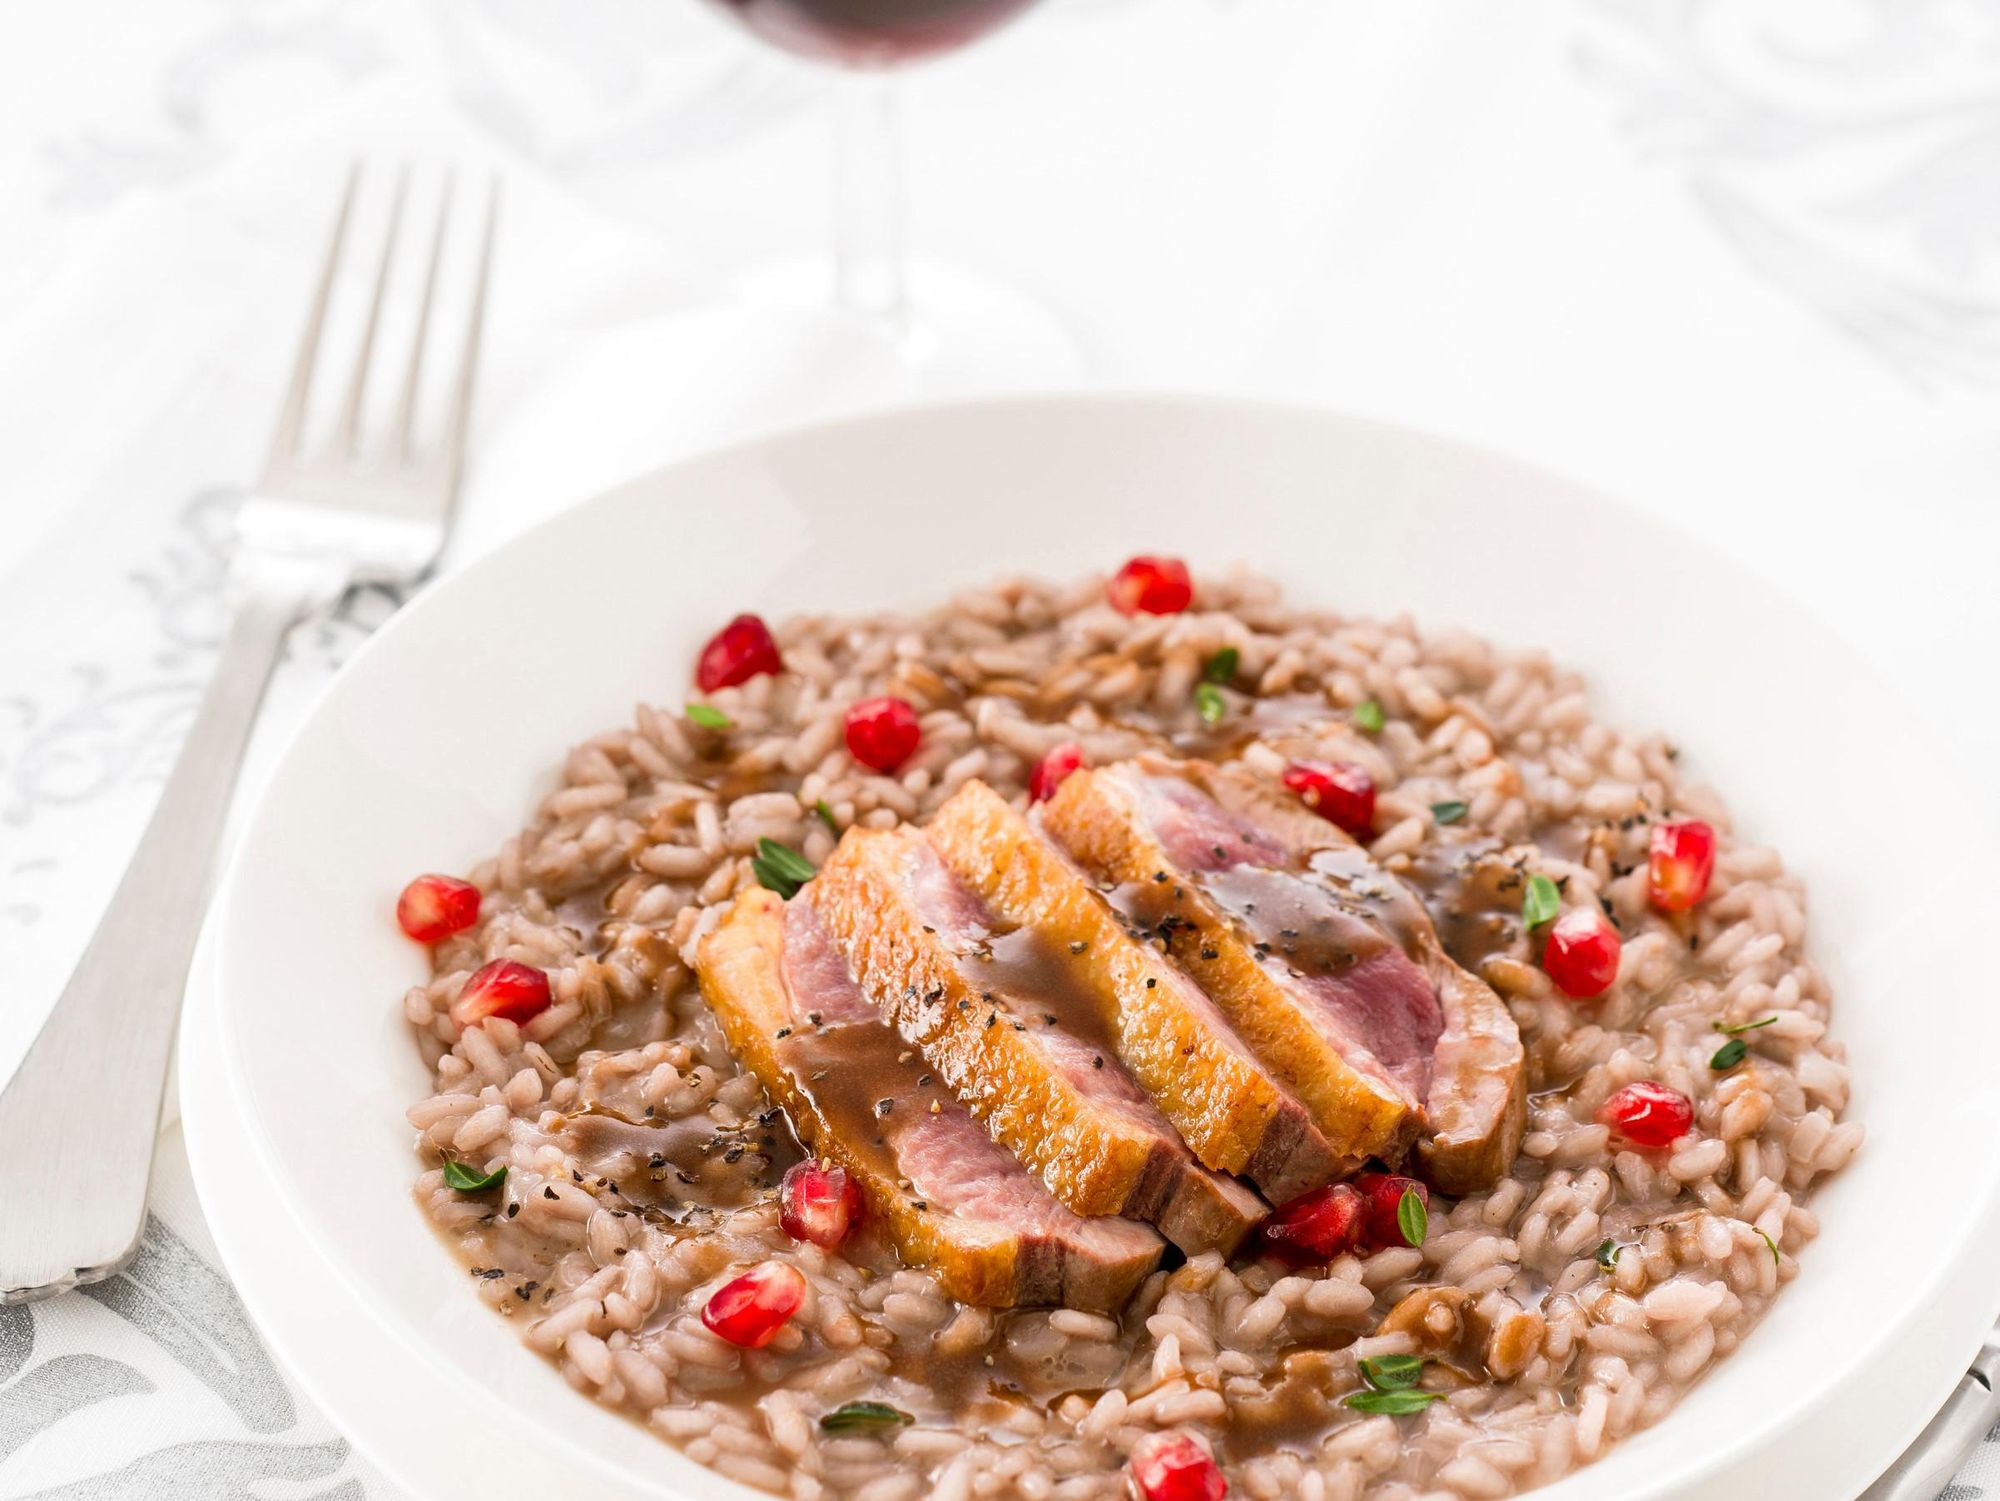 Risotto with duck breast, pomegranate, and port wine